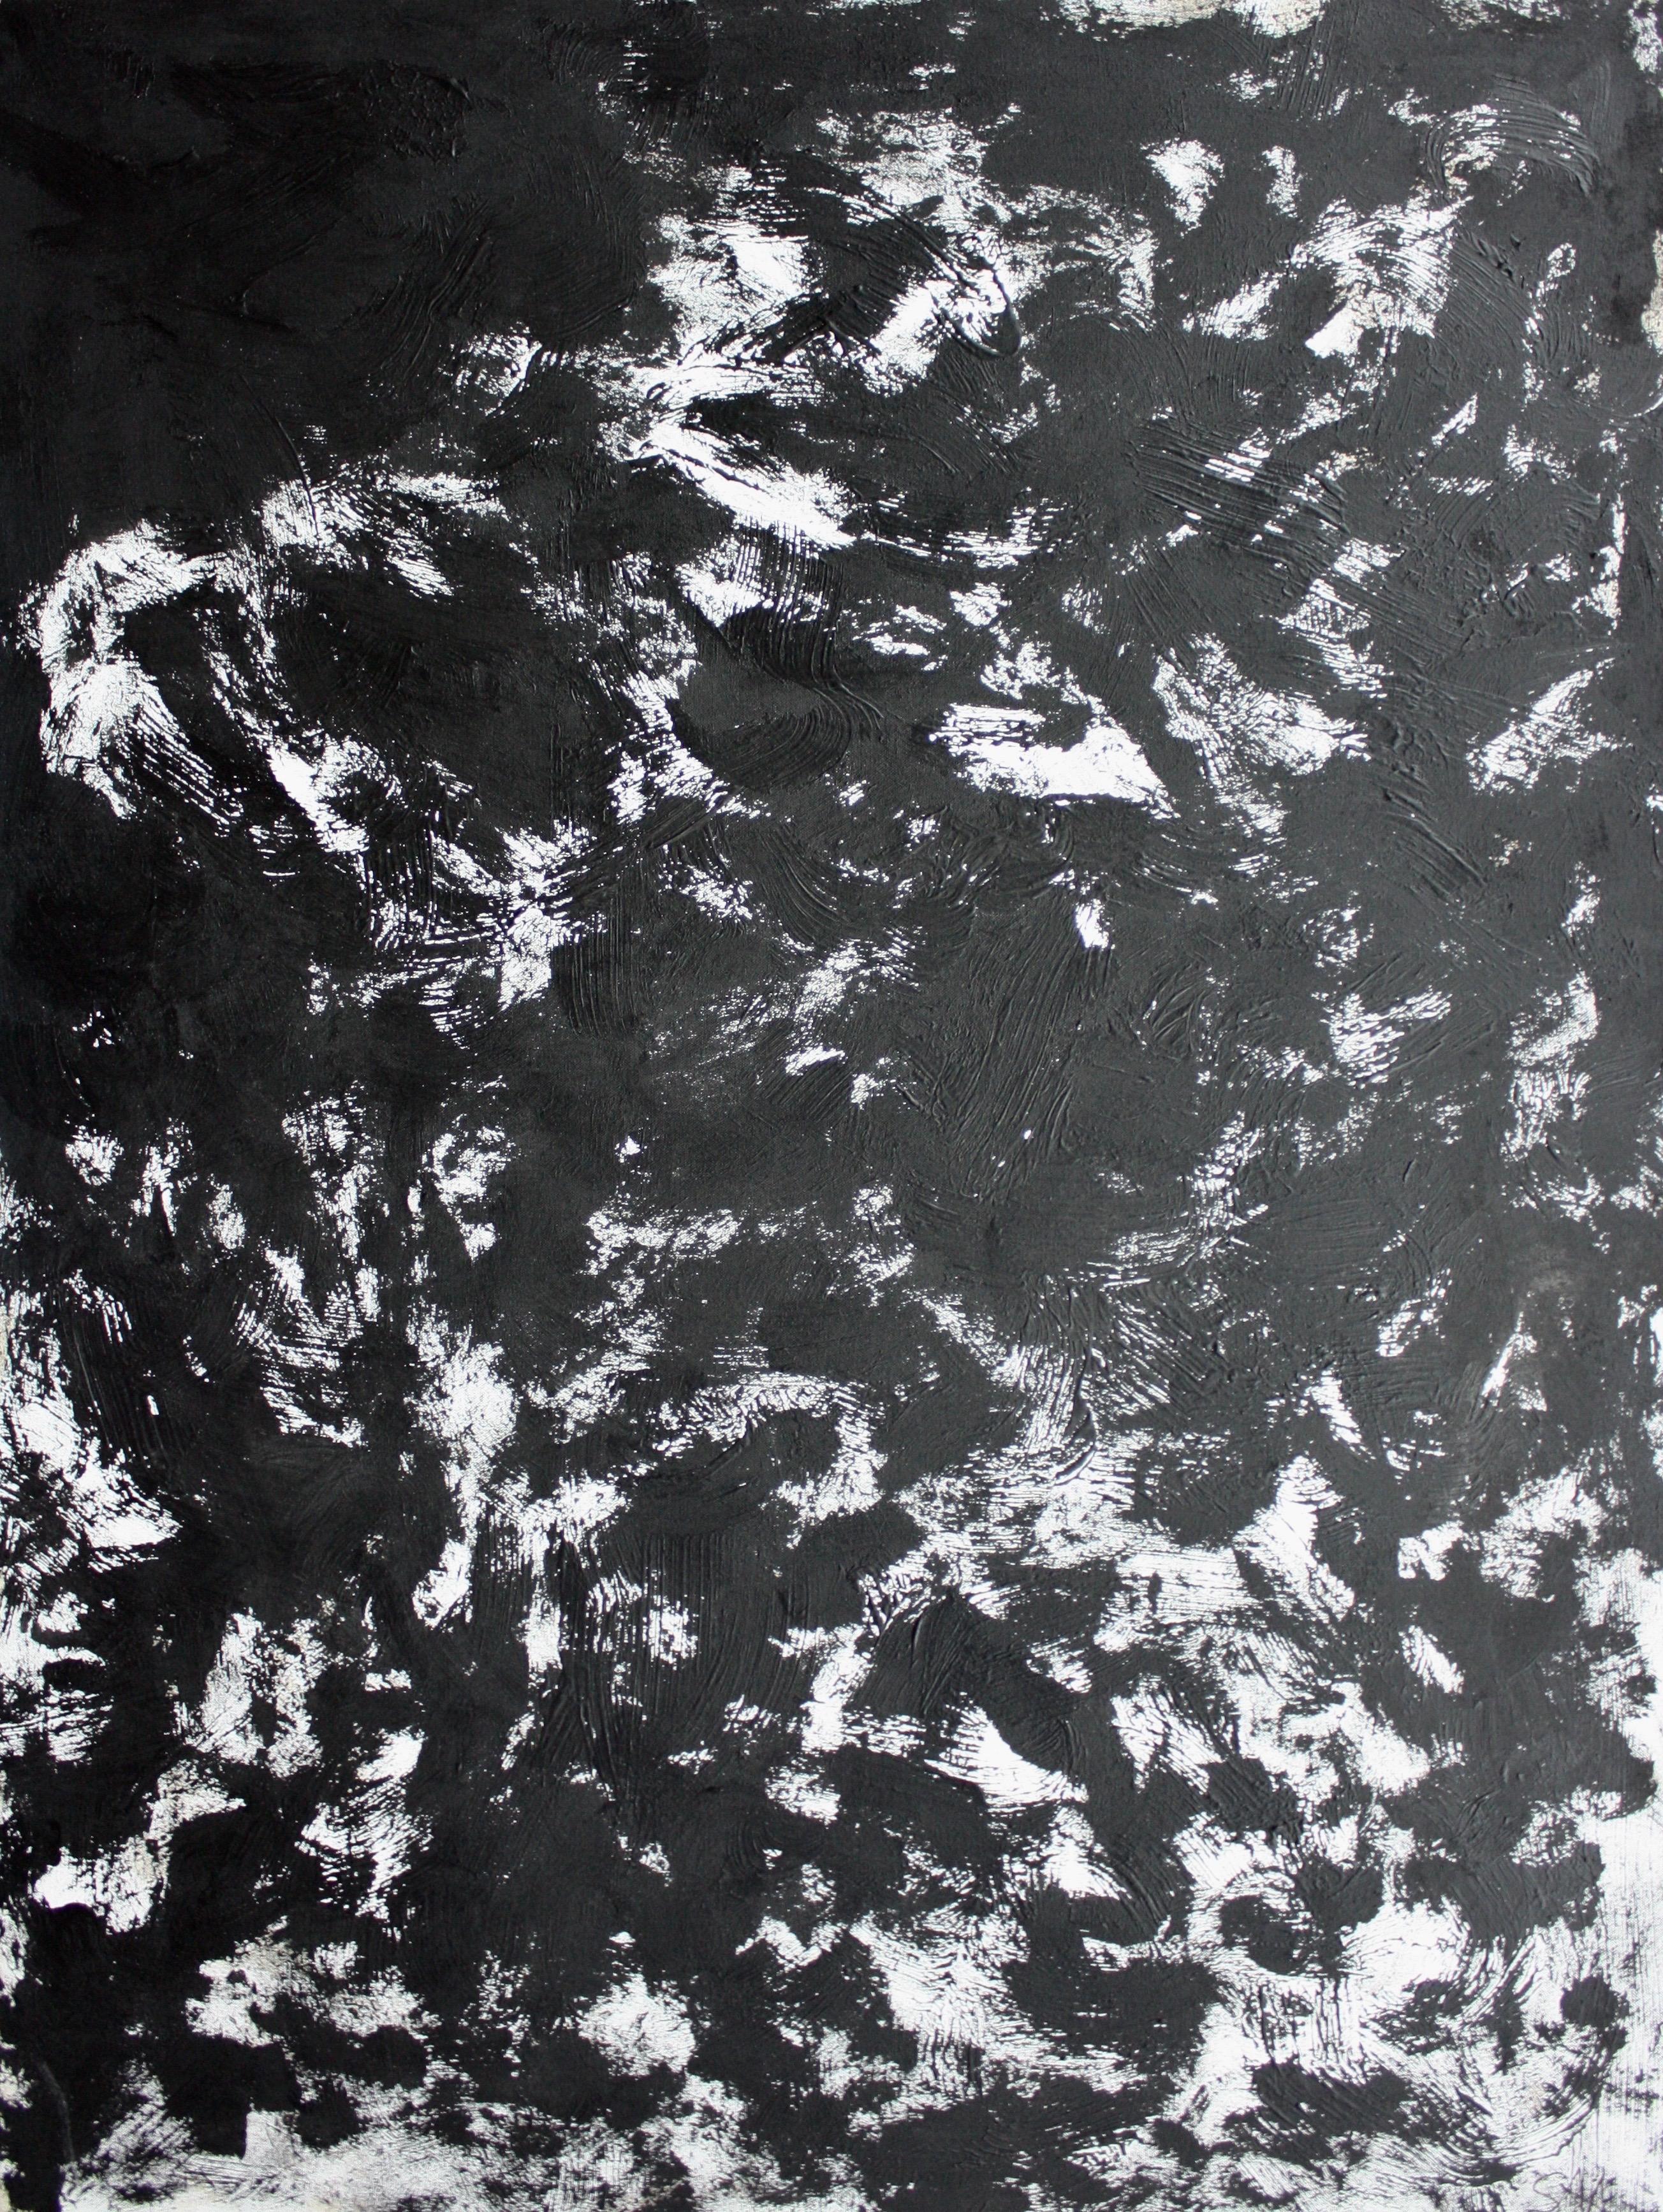 Black and white abstract painting from the studio of Sax Berlin